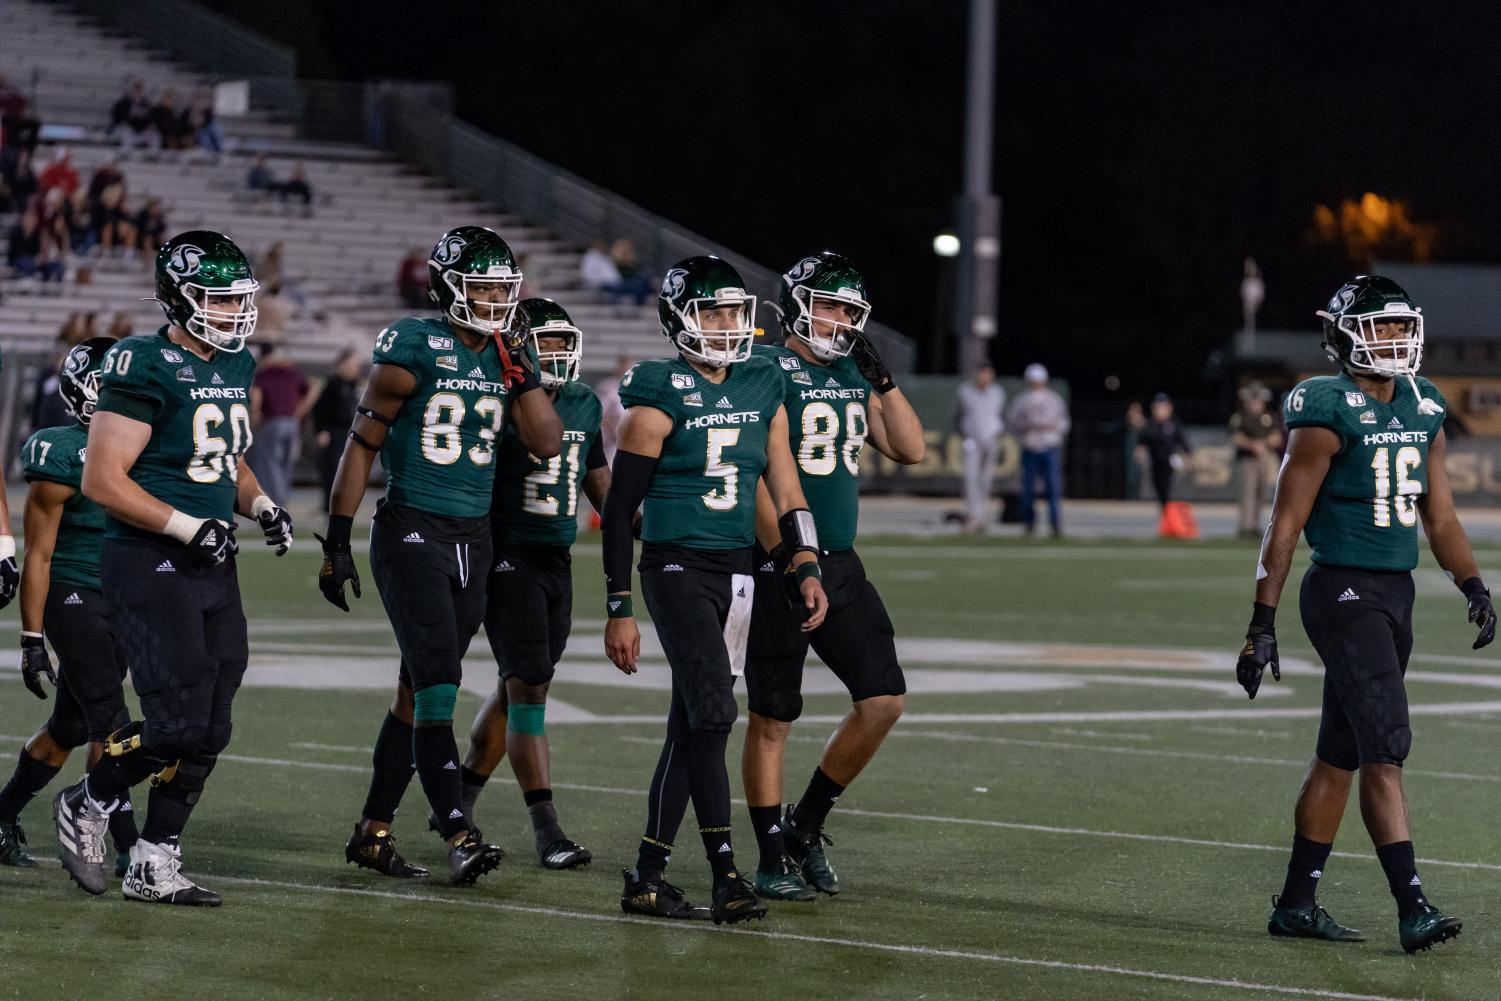 PREVIEW: No. 7 Sac State football team prepares for Cal Poly’s triple-option offense - The State